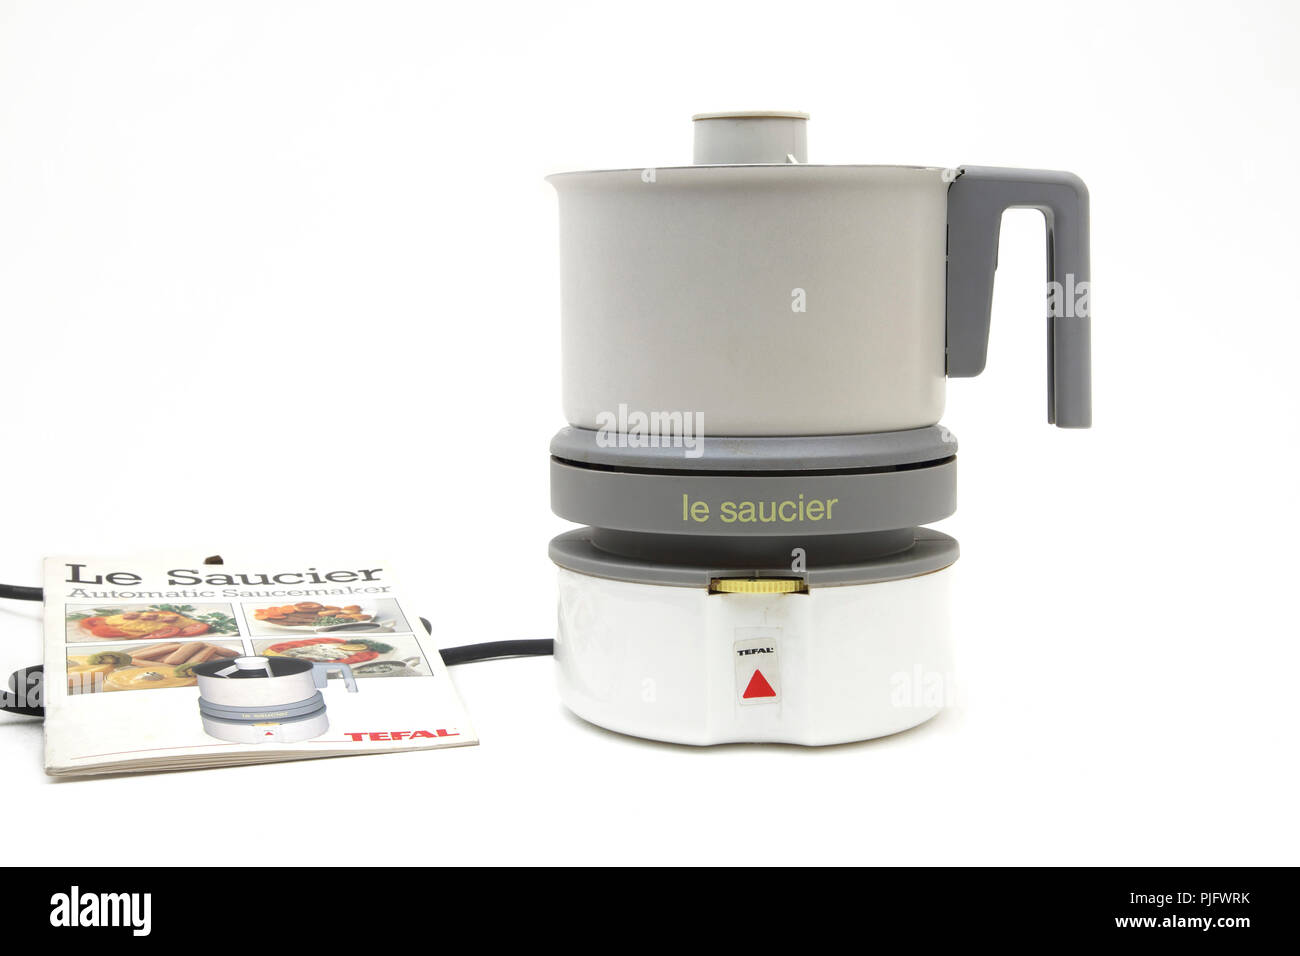 Tefal Le Saucier Automatic Saucemaker and Recipe Book Stock Photo - Alamy